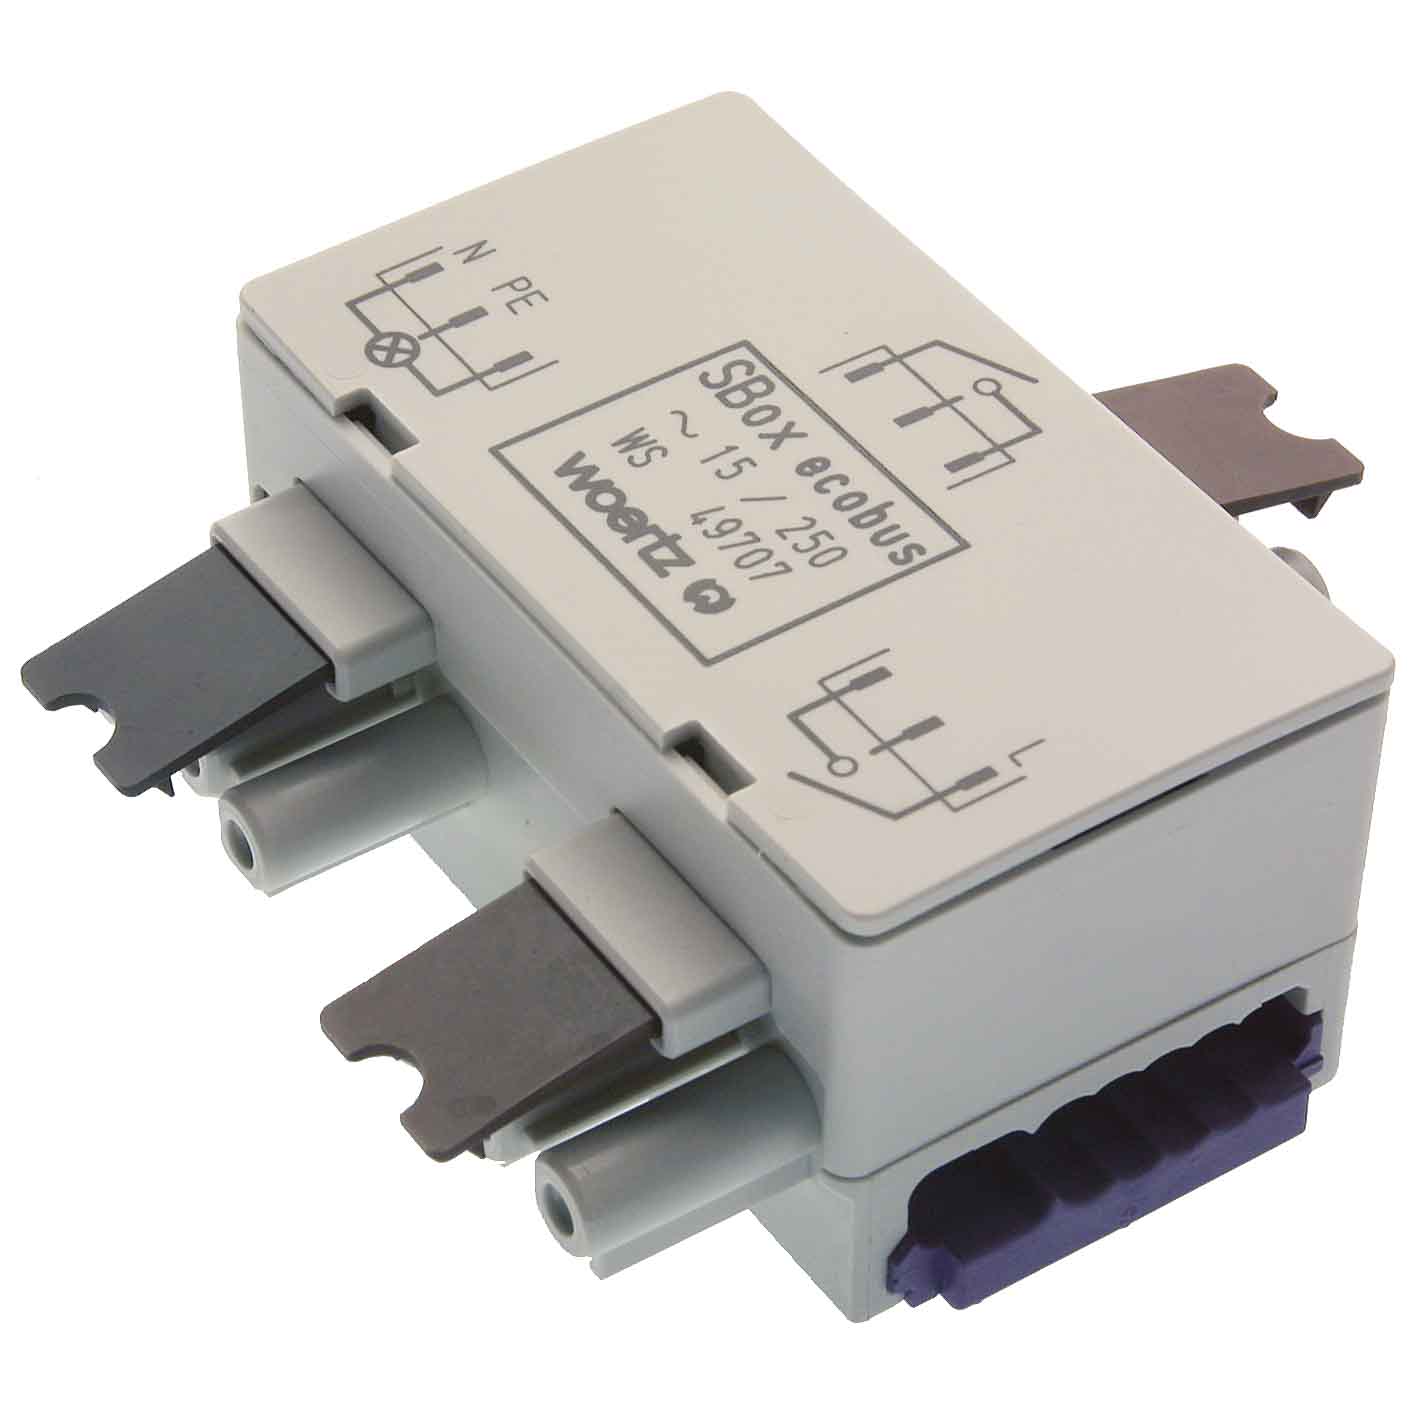 Junction box for flat cable combi changeover C1 C4 Q